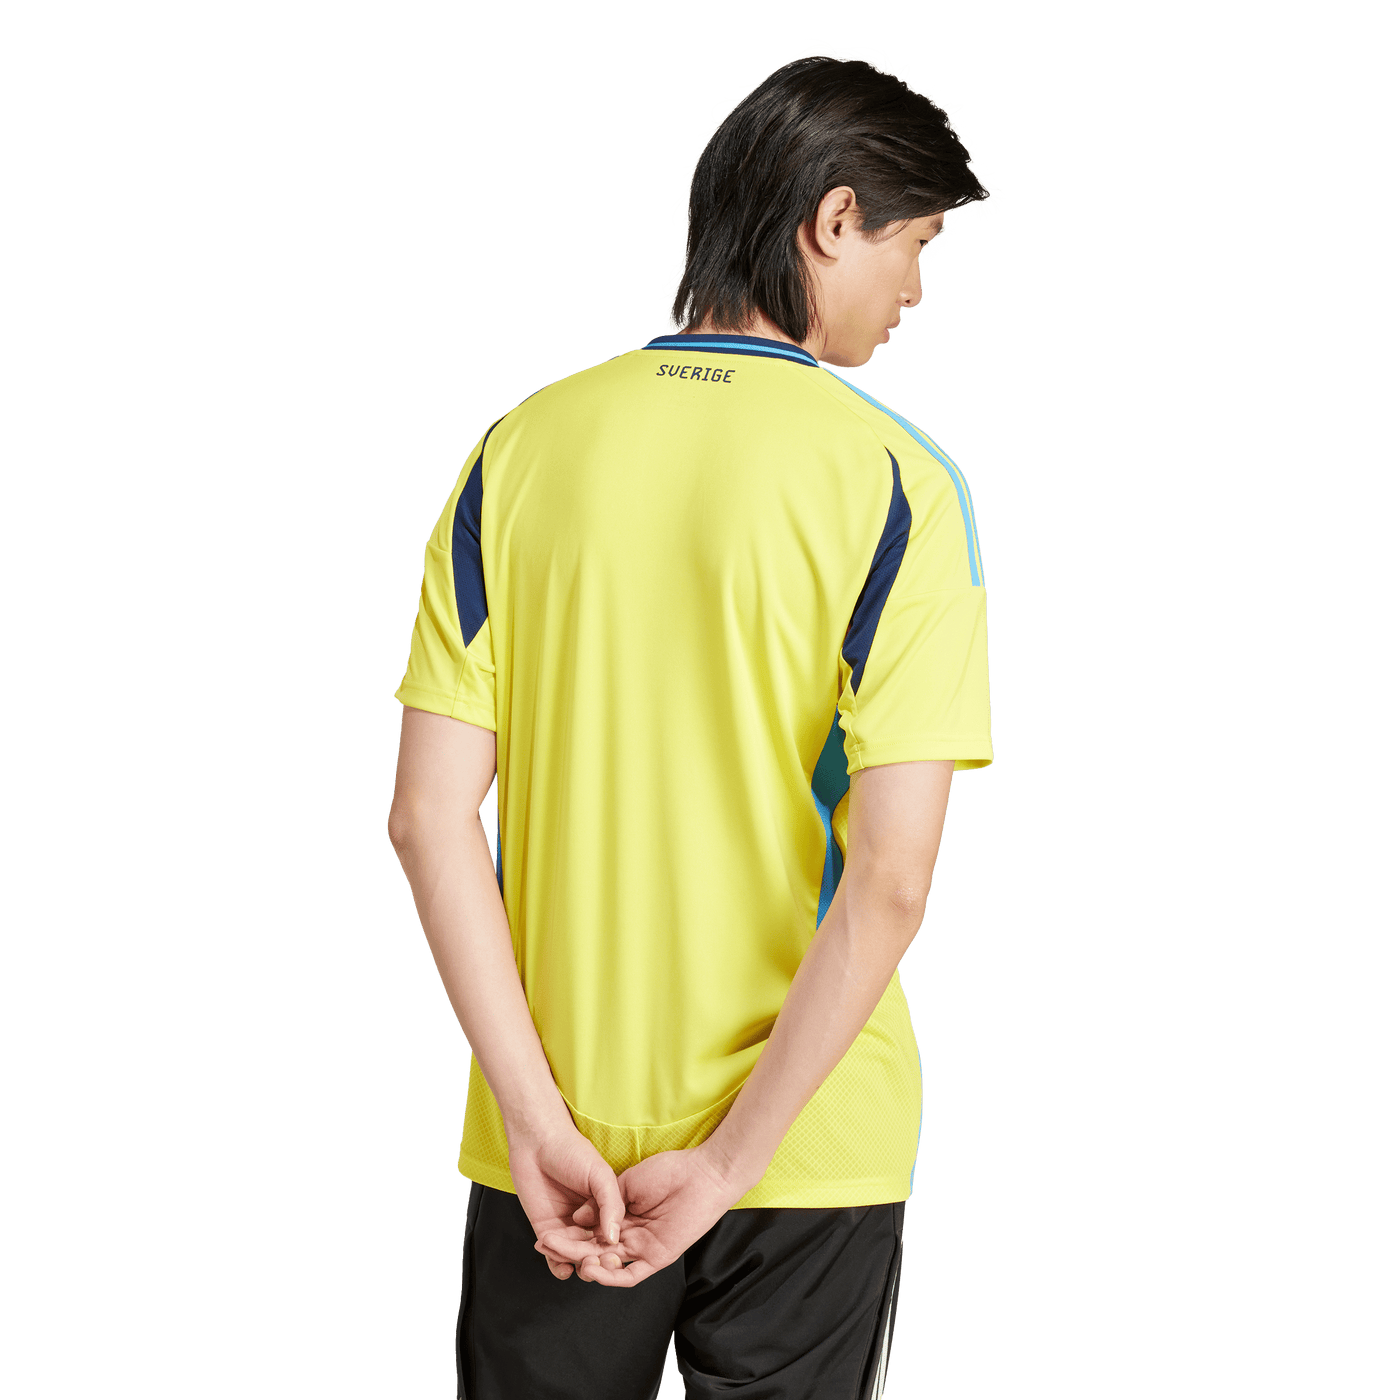 Sweden National Adults Home Jersey 2024